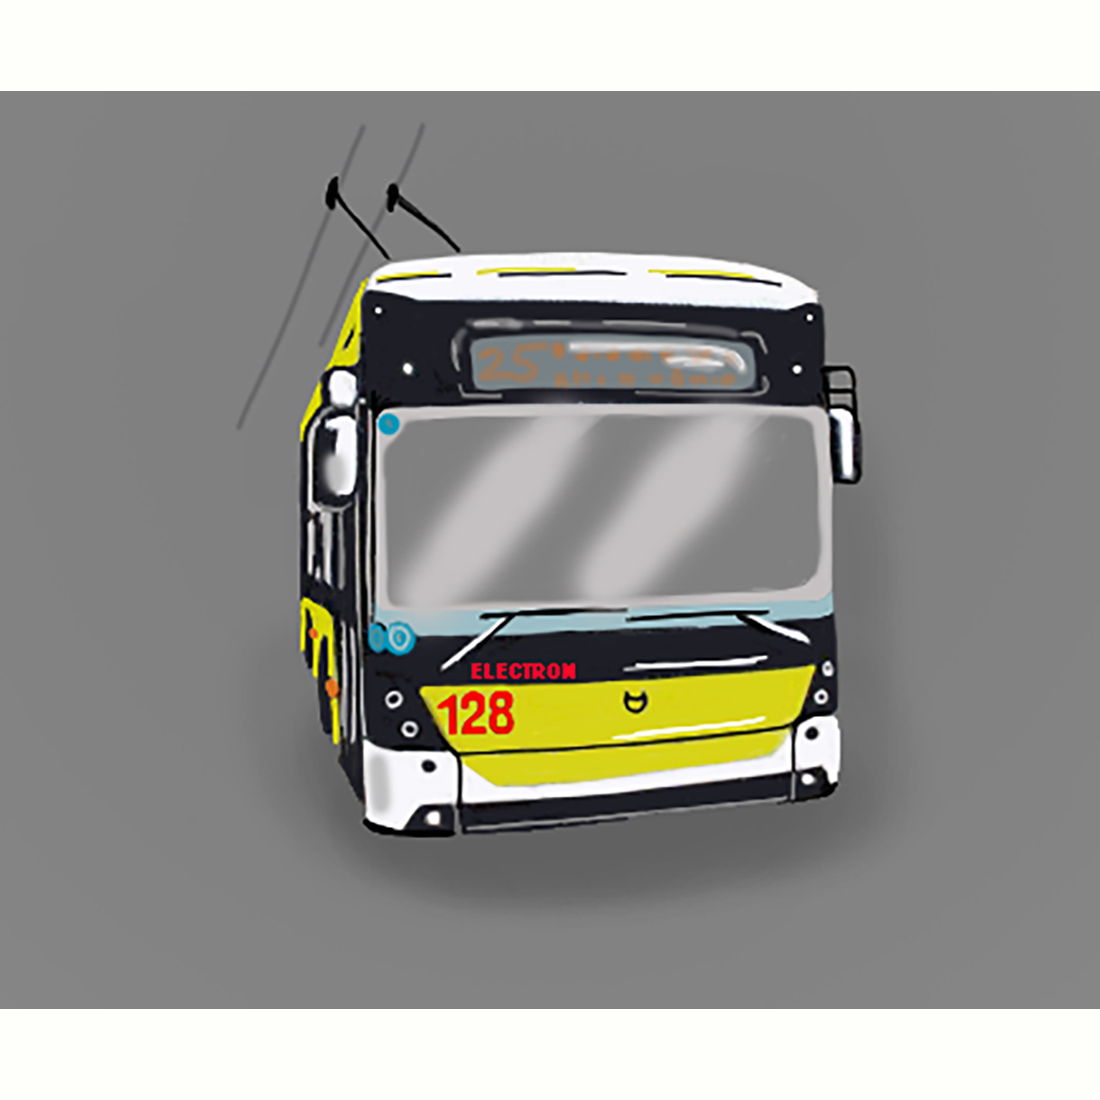 Trolleybus preview image.